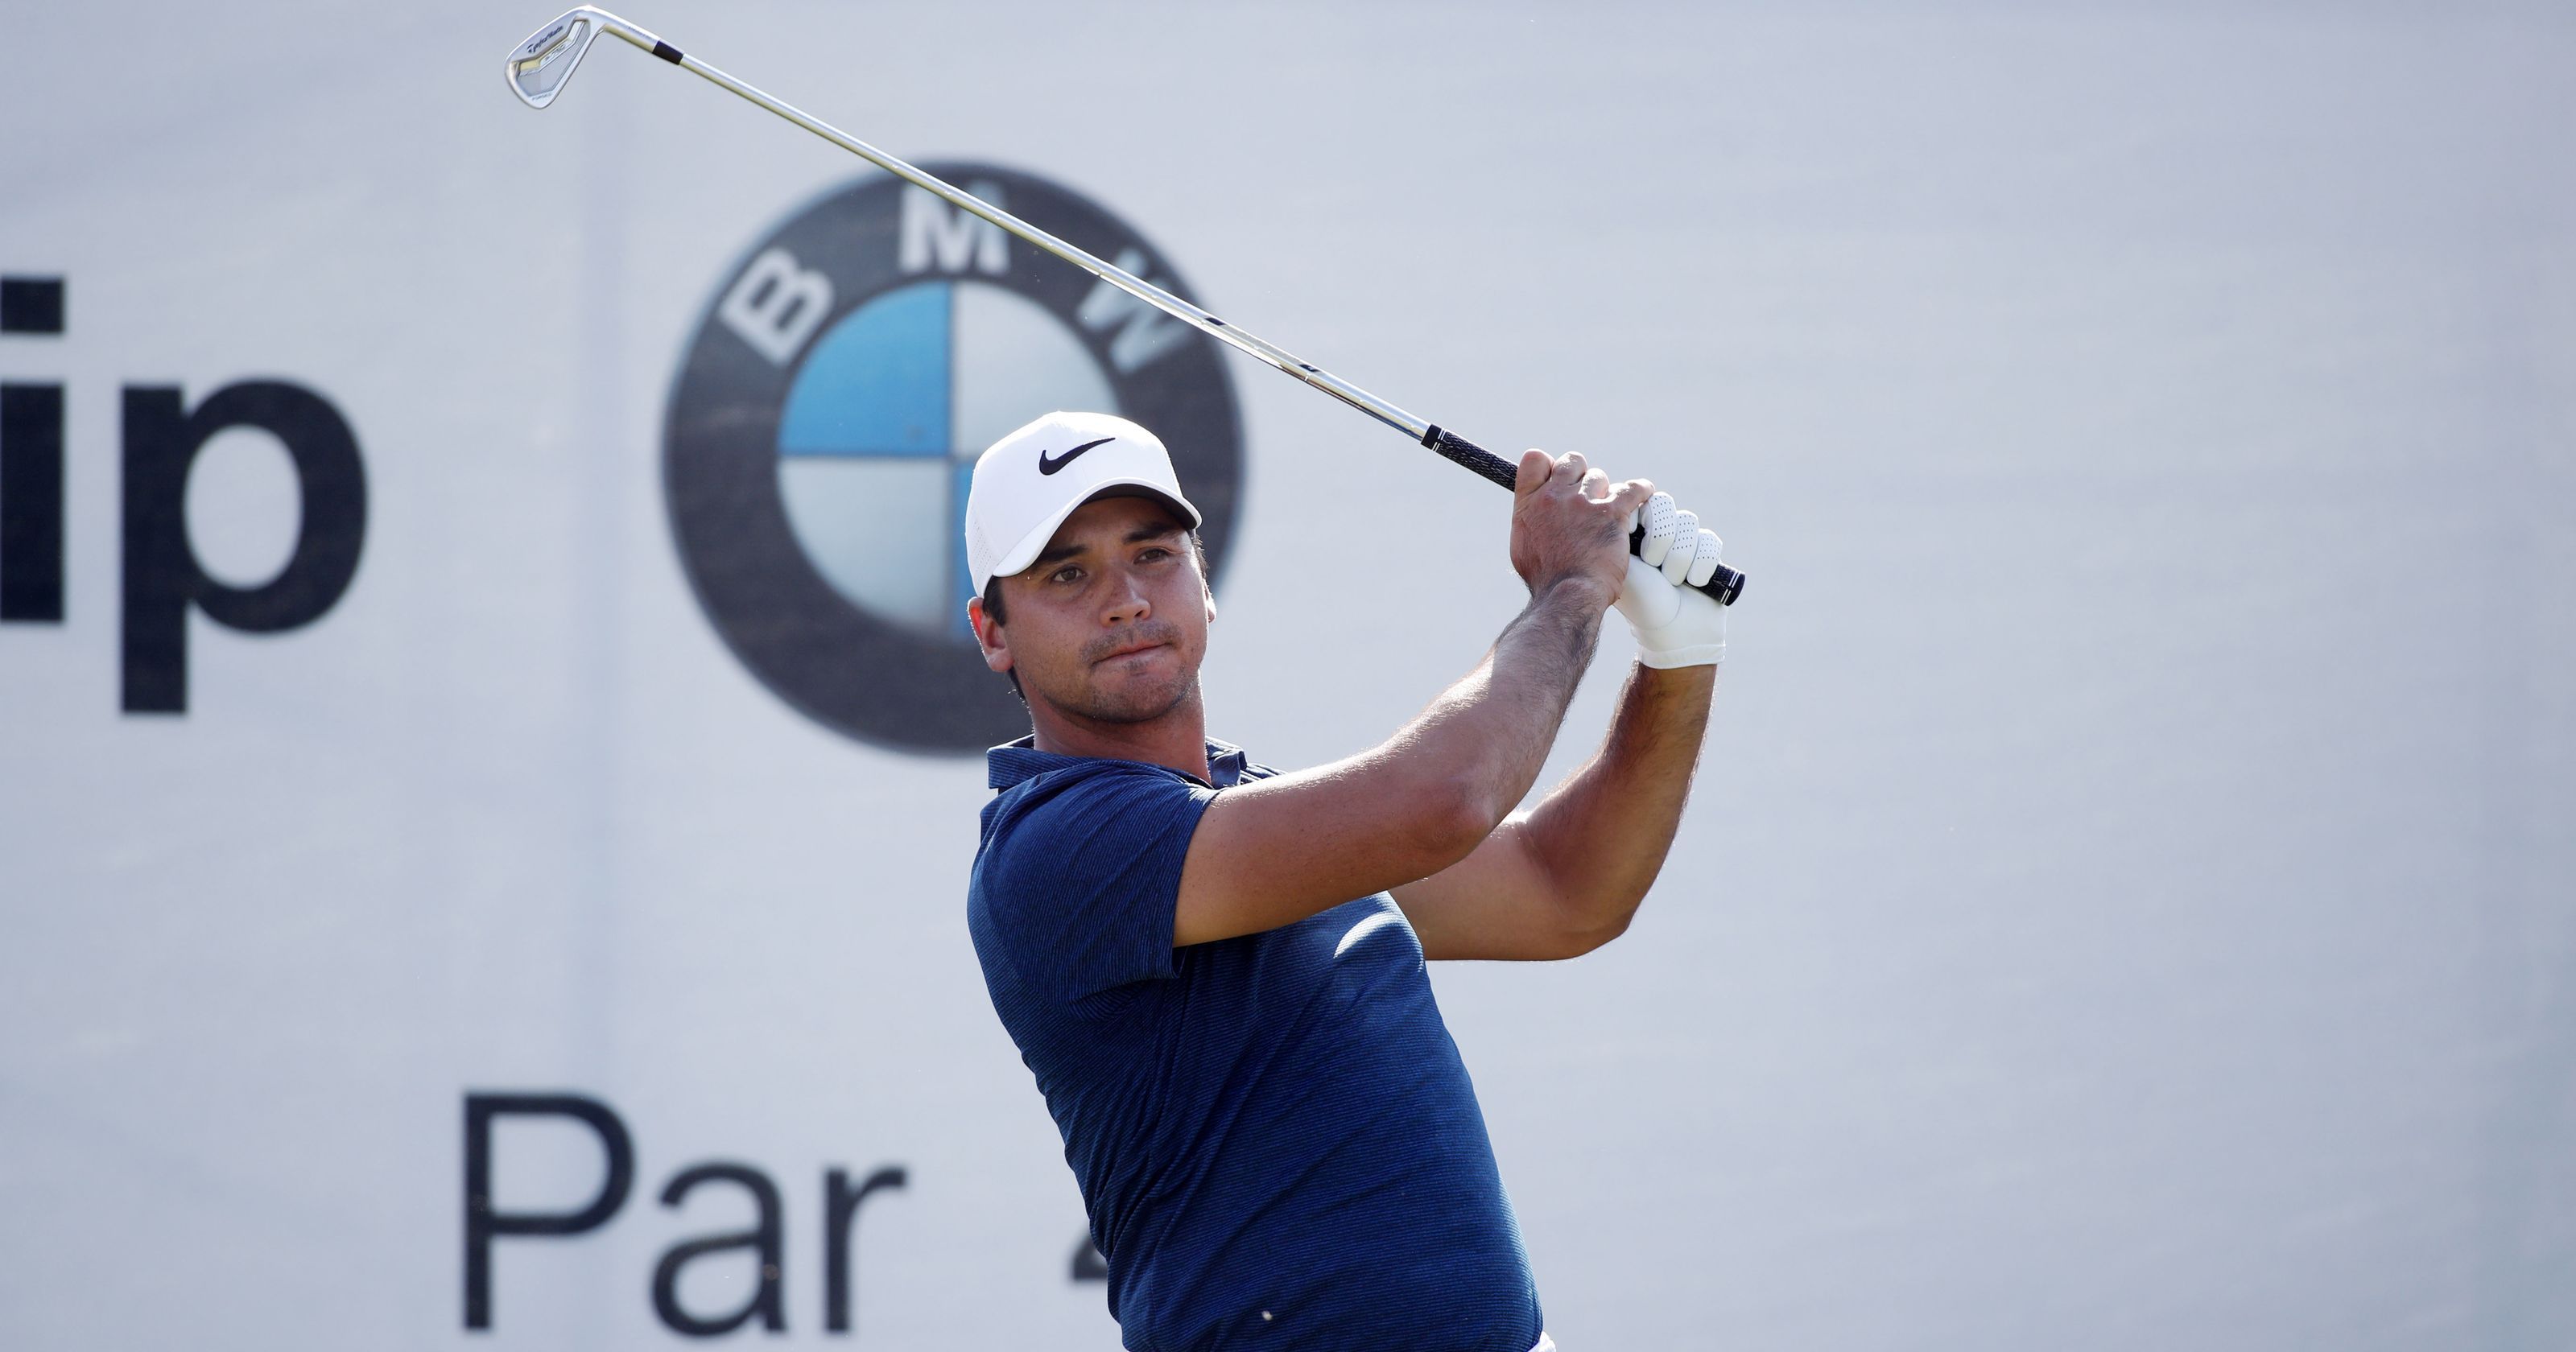 Un-Leished:  Leishman Sets Torrid 36-Hole Pace At BMW